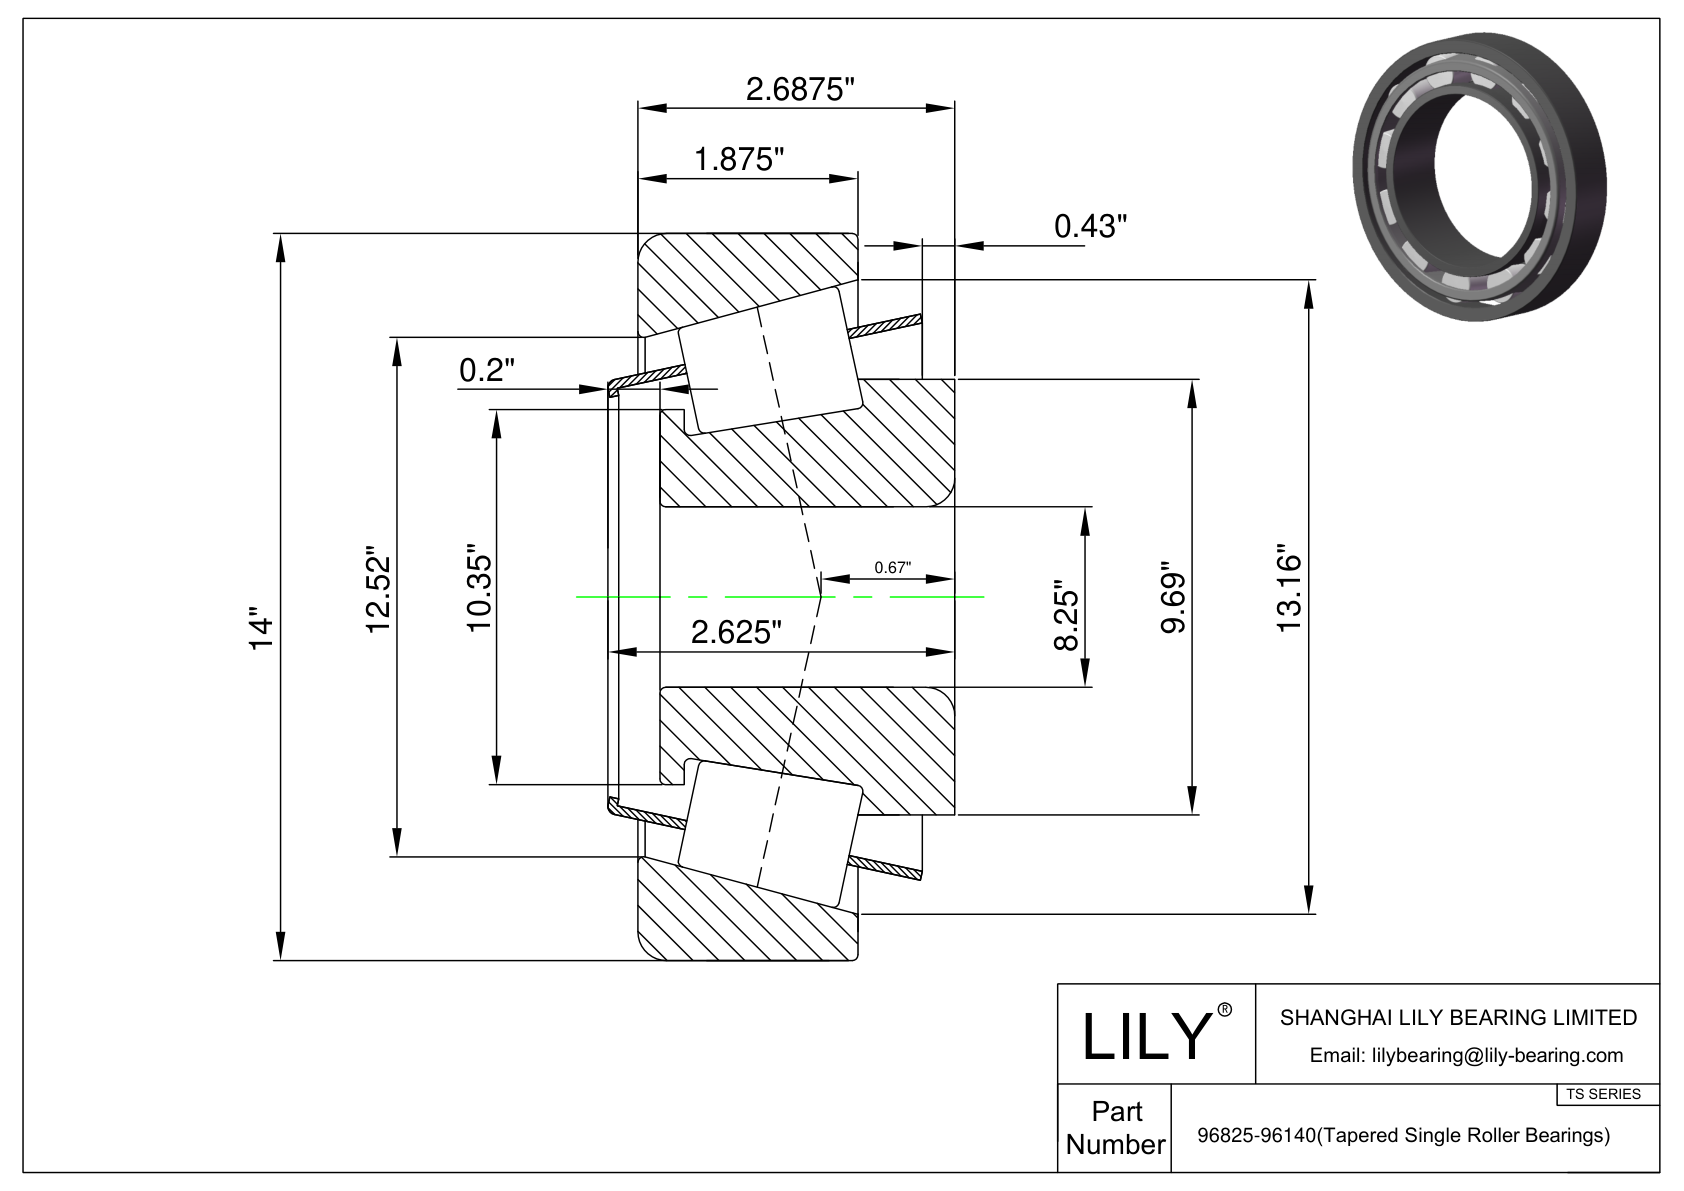 96825-96140 TS (Tapered Single Roller Bearings) (Imperial) cad drawing